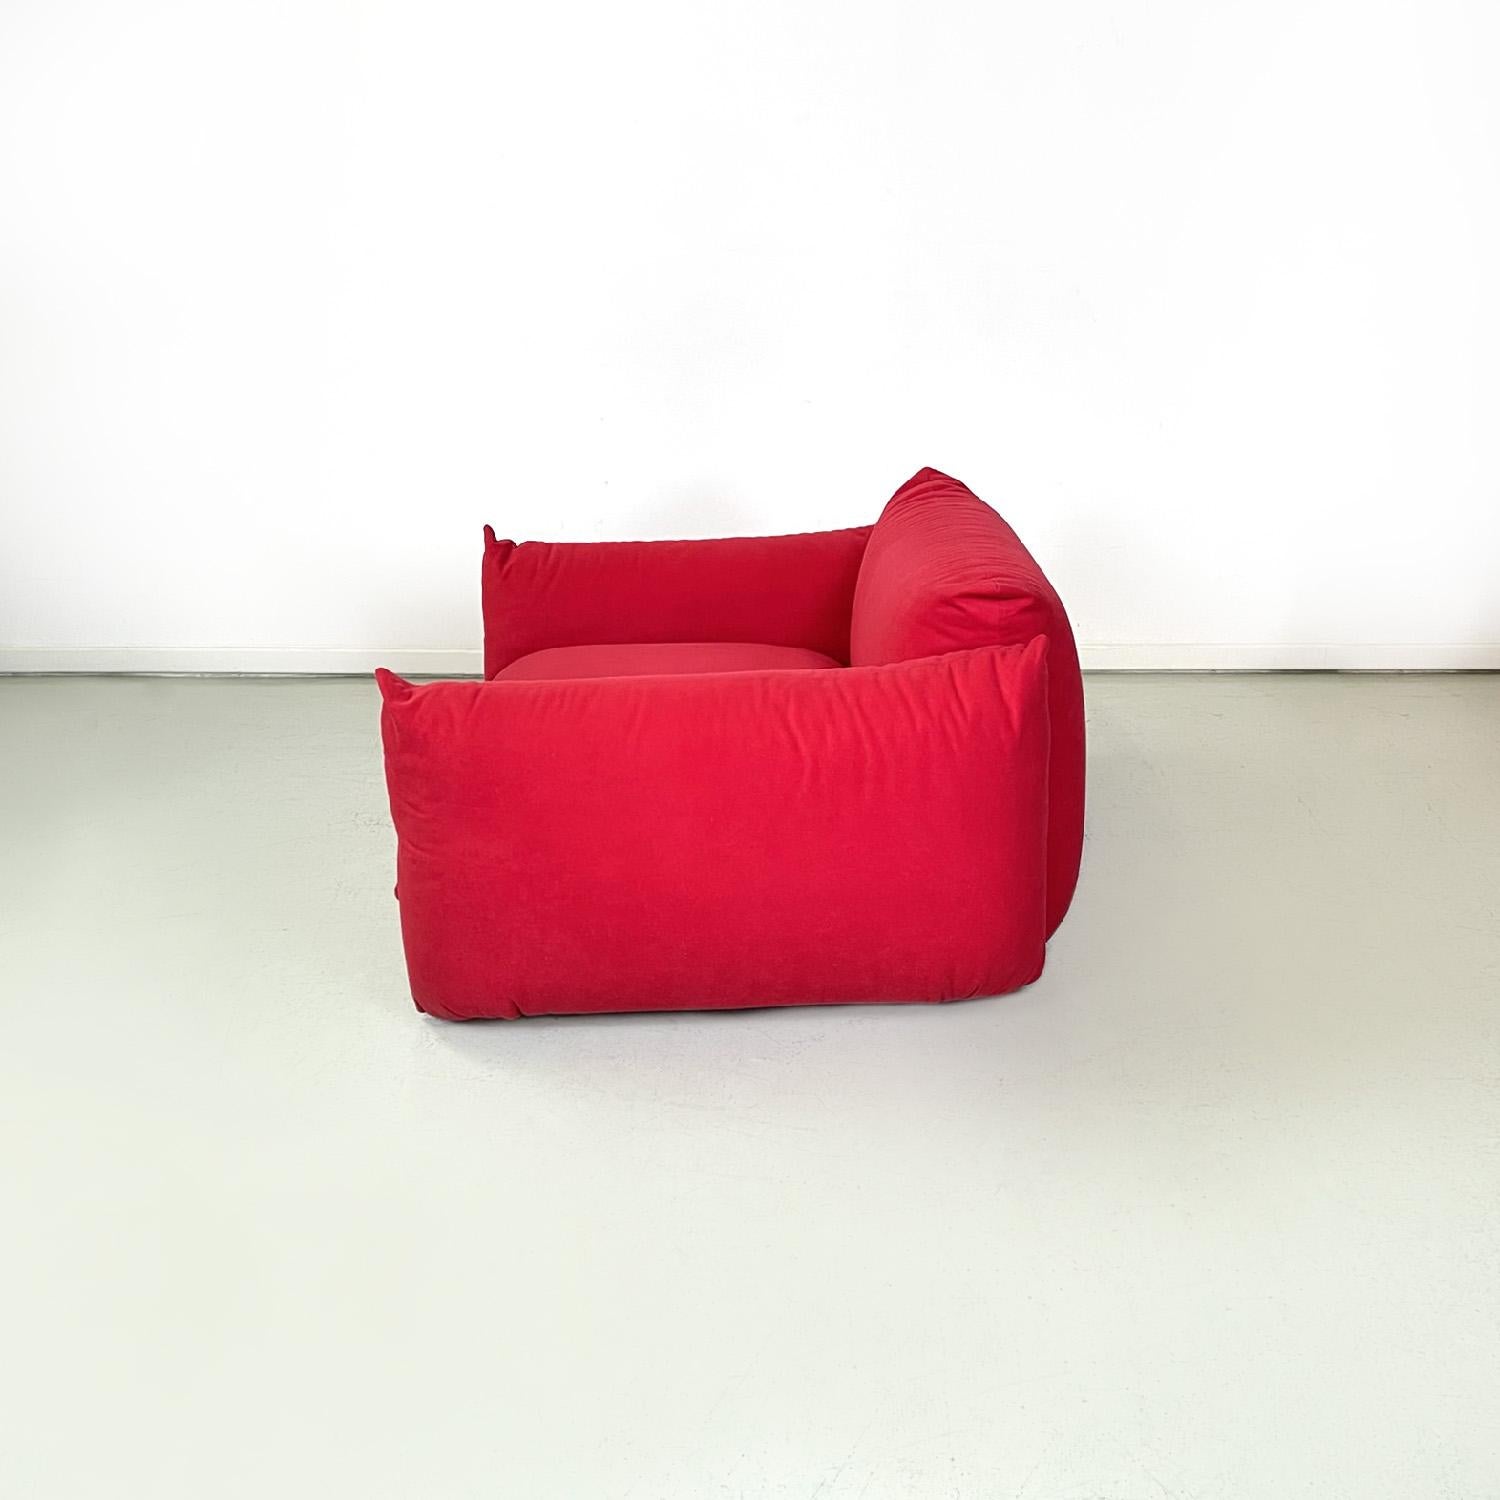 Metal Italian modern red living room Marenco by Mario Marenco for Arflex, 1970s For Sale